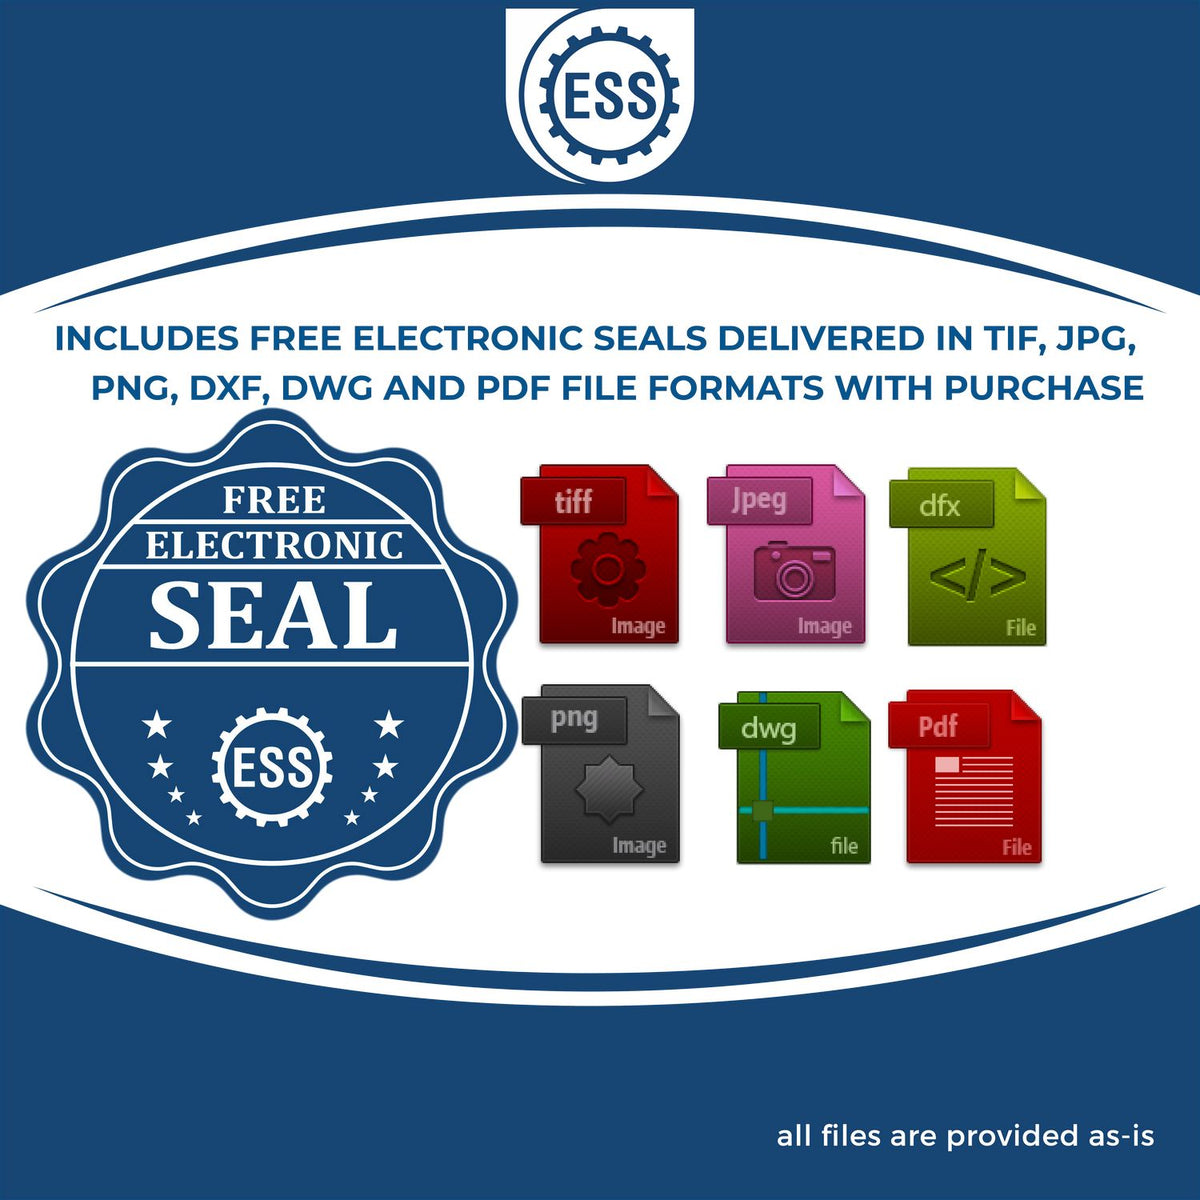 An infographic for the free electronic seal for the Premium MaxLight Pre-Inked Utah Geology Stamp illustrating the different file type icons such as DXF, DWG, TIF, JPG and PNG.